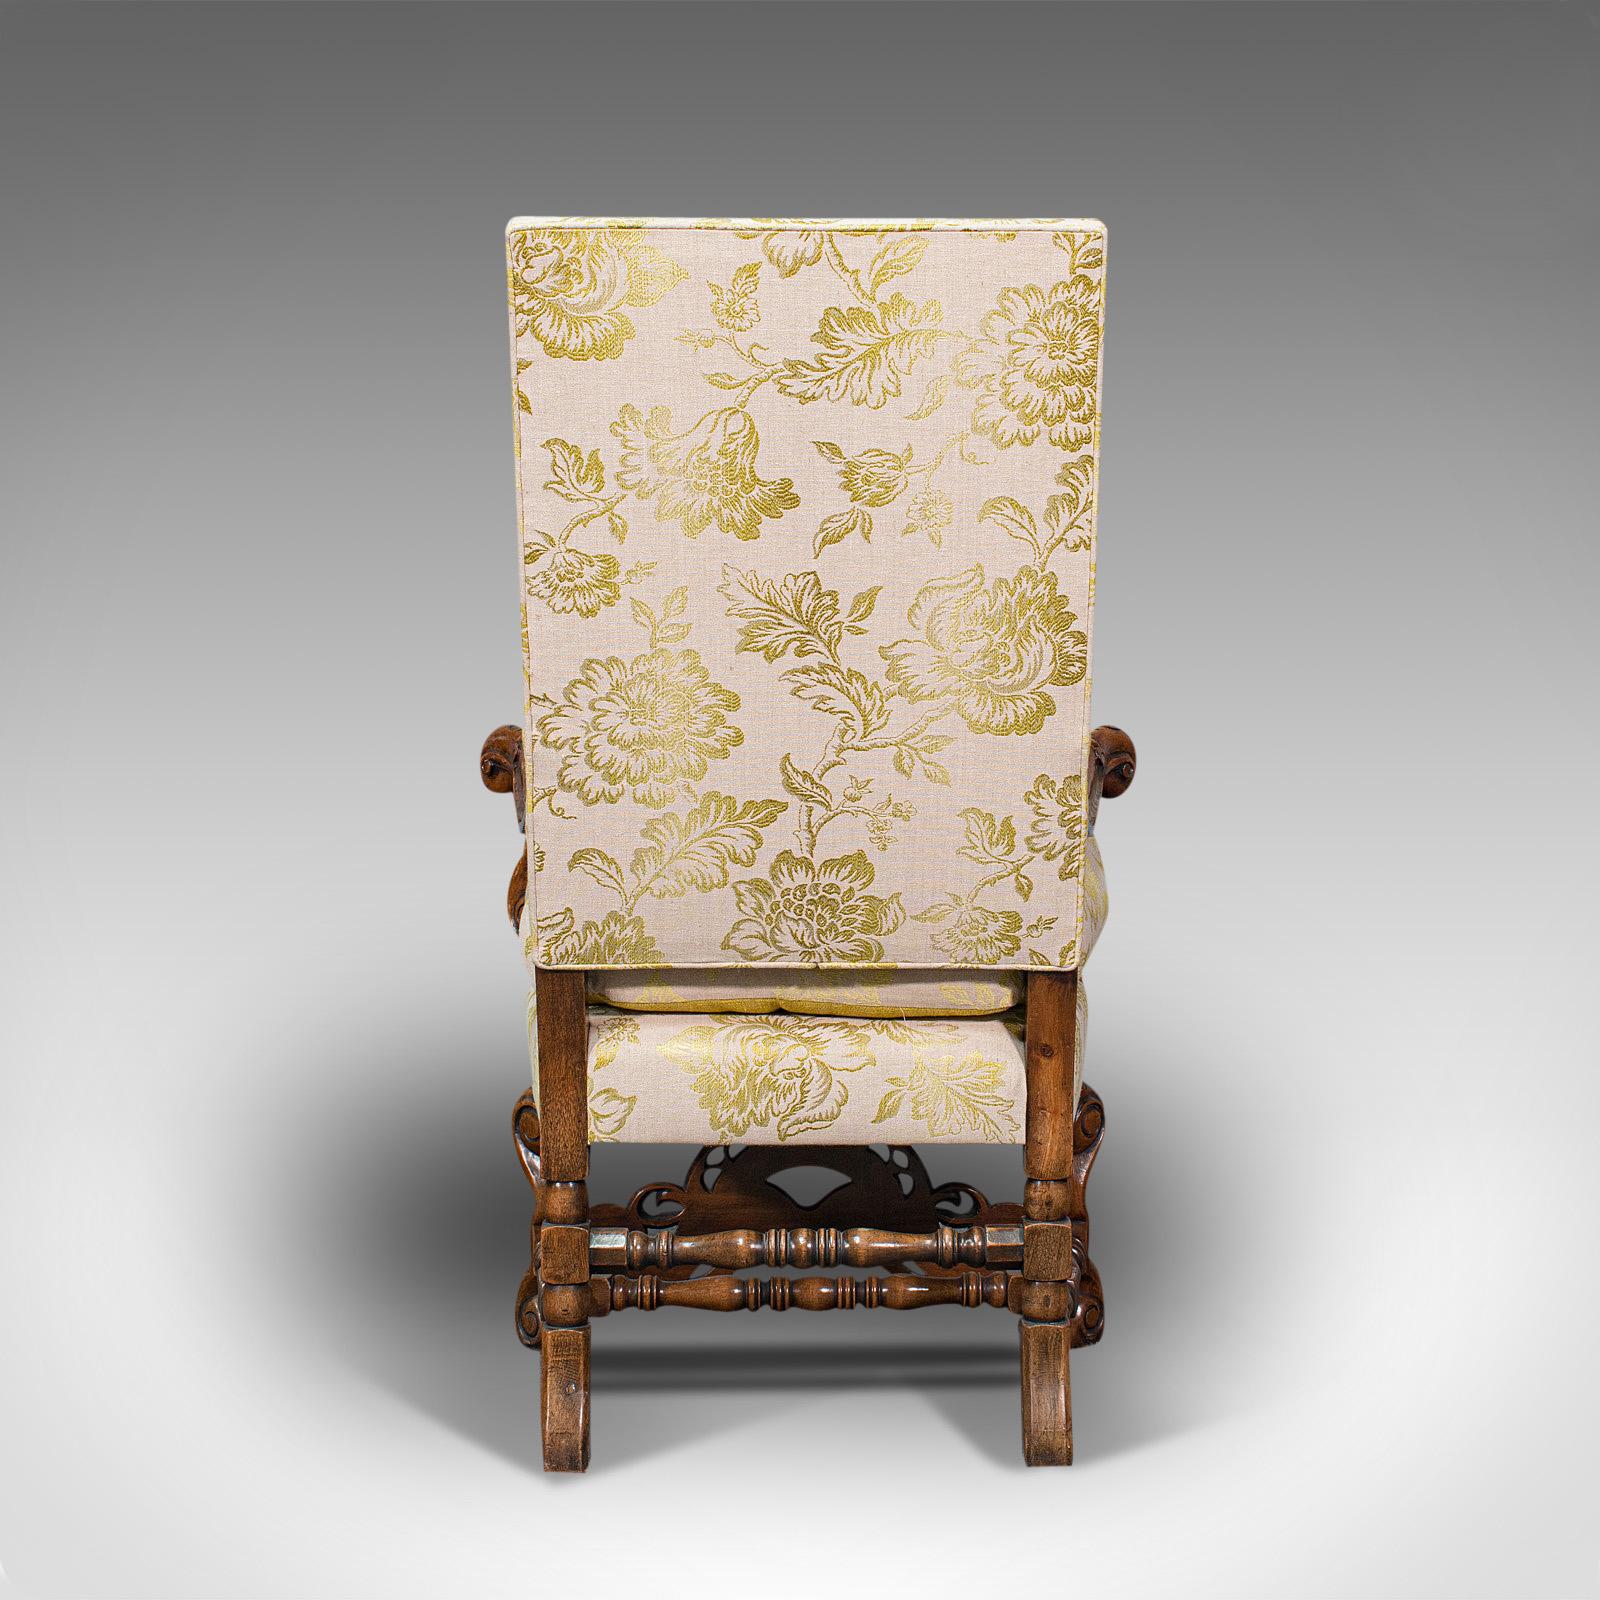 19th Century Pair of Antique Drawing Room Elbow Chairs, English, Walnut, Armchair, Georgian